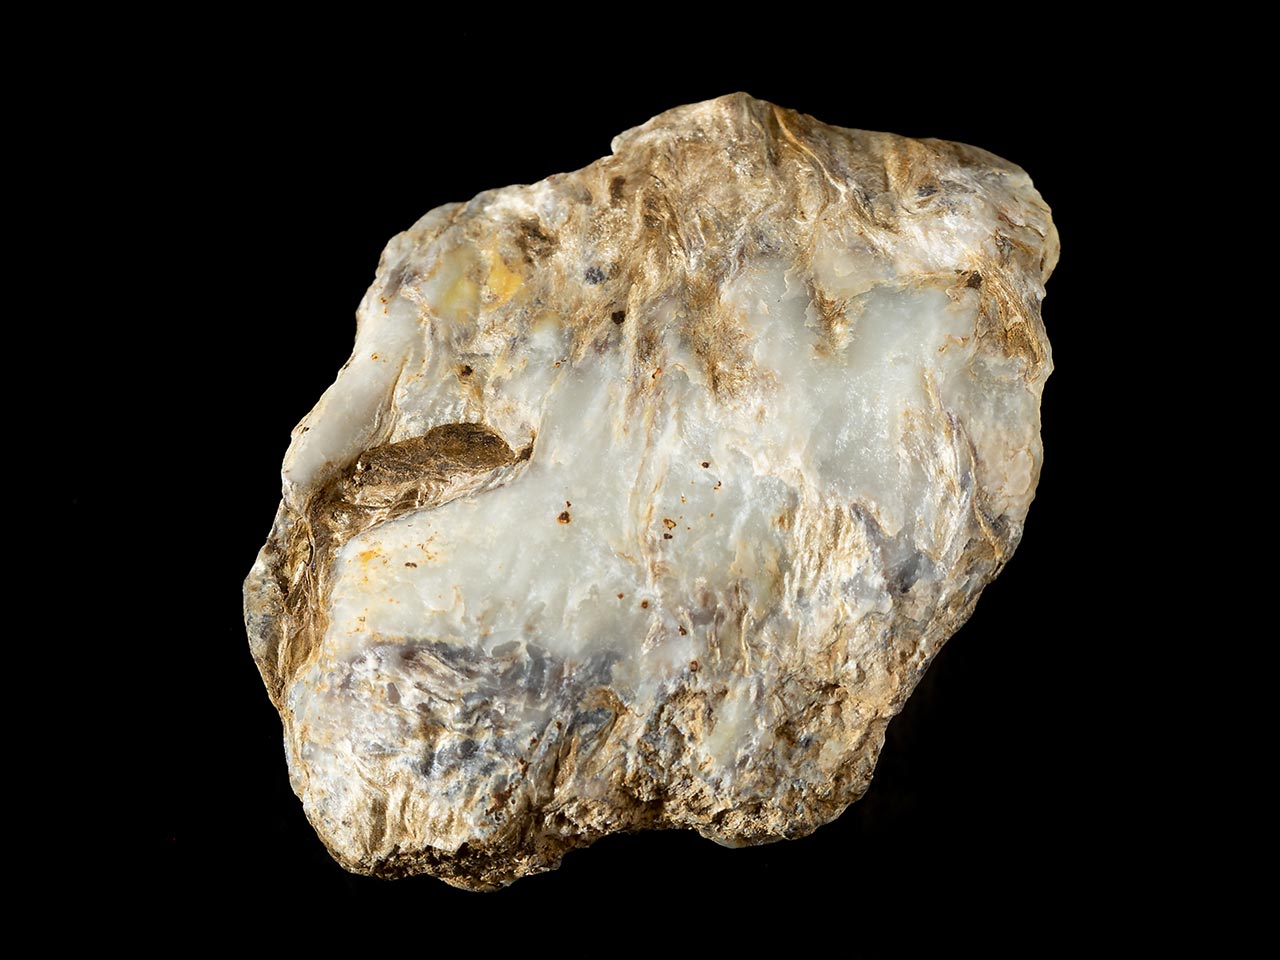 White sillimanite aggregate composed of very fine fibers from Arneštovice, Czech Republic